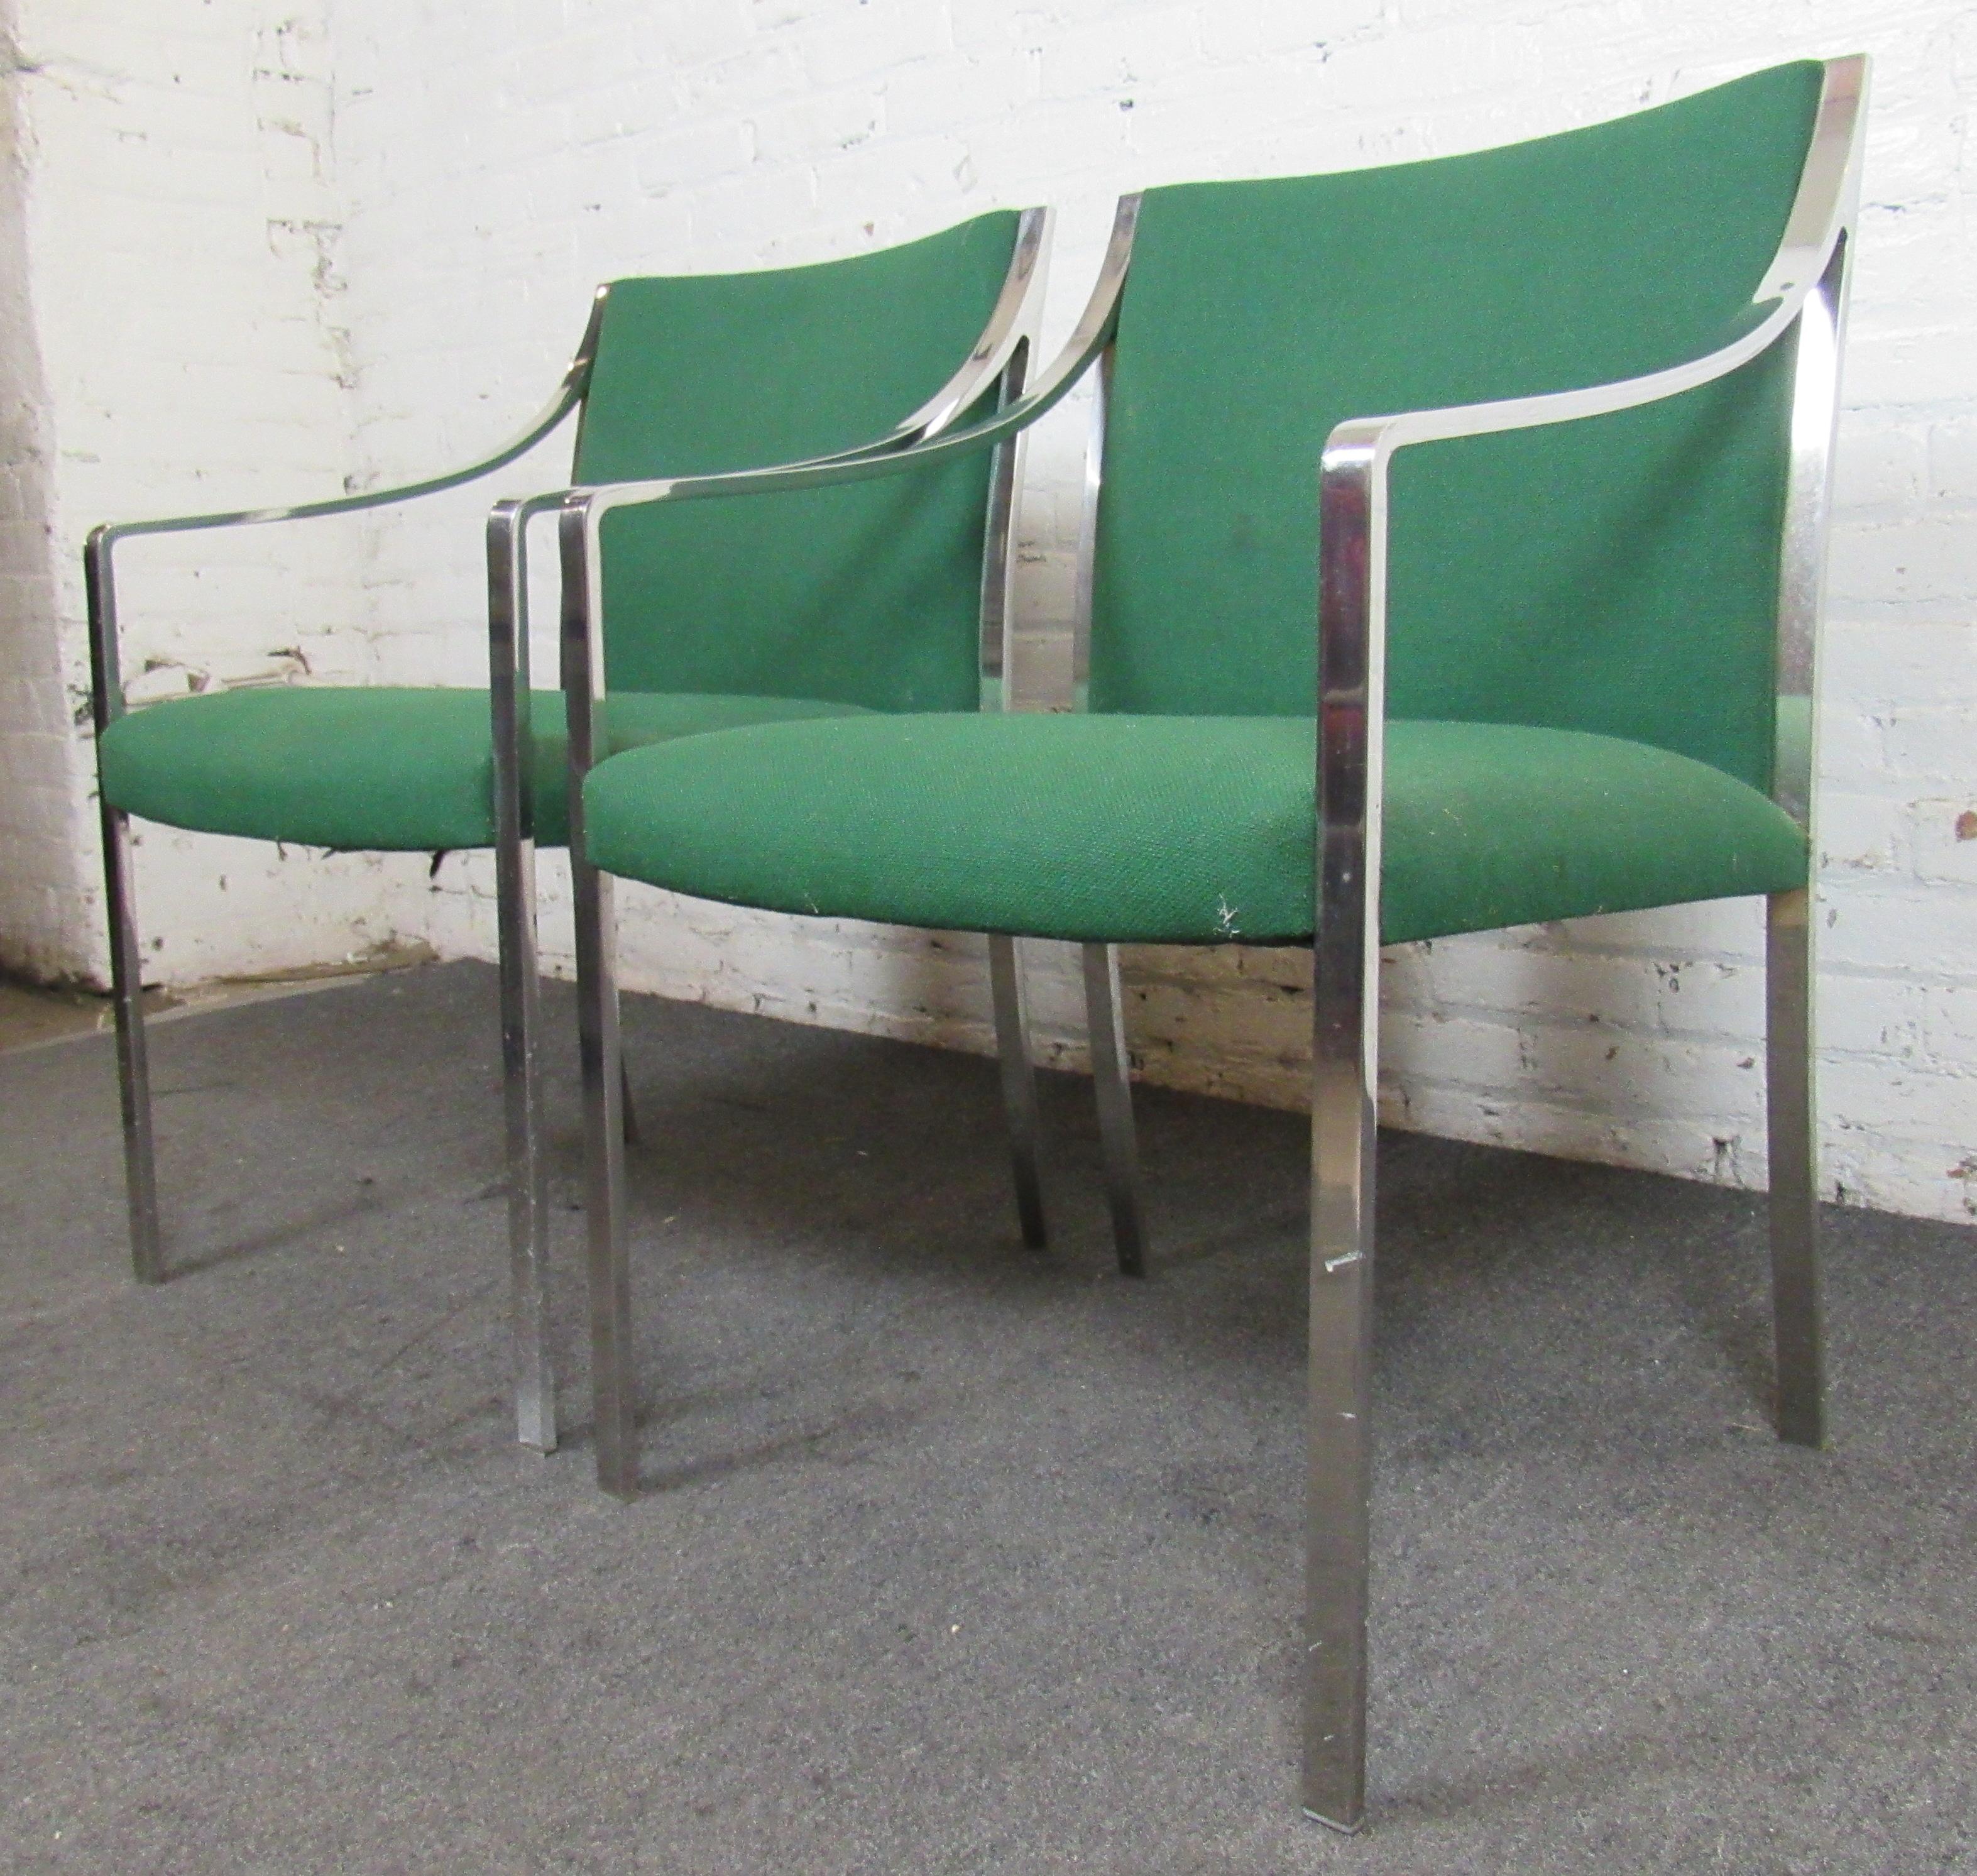 Pair of Mid-Century Modern office chairs by Stow Davis. Featuring polished chrome frame with swooping arms.
Please confirm location NY or NJ.